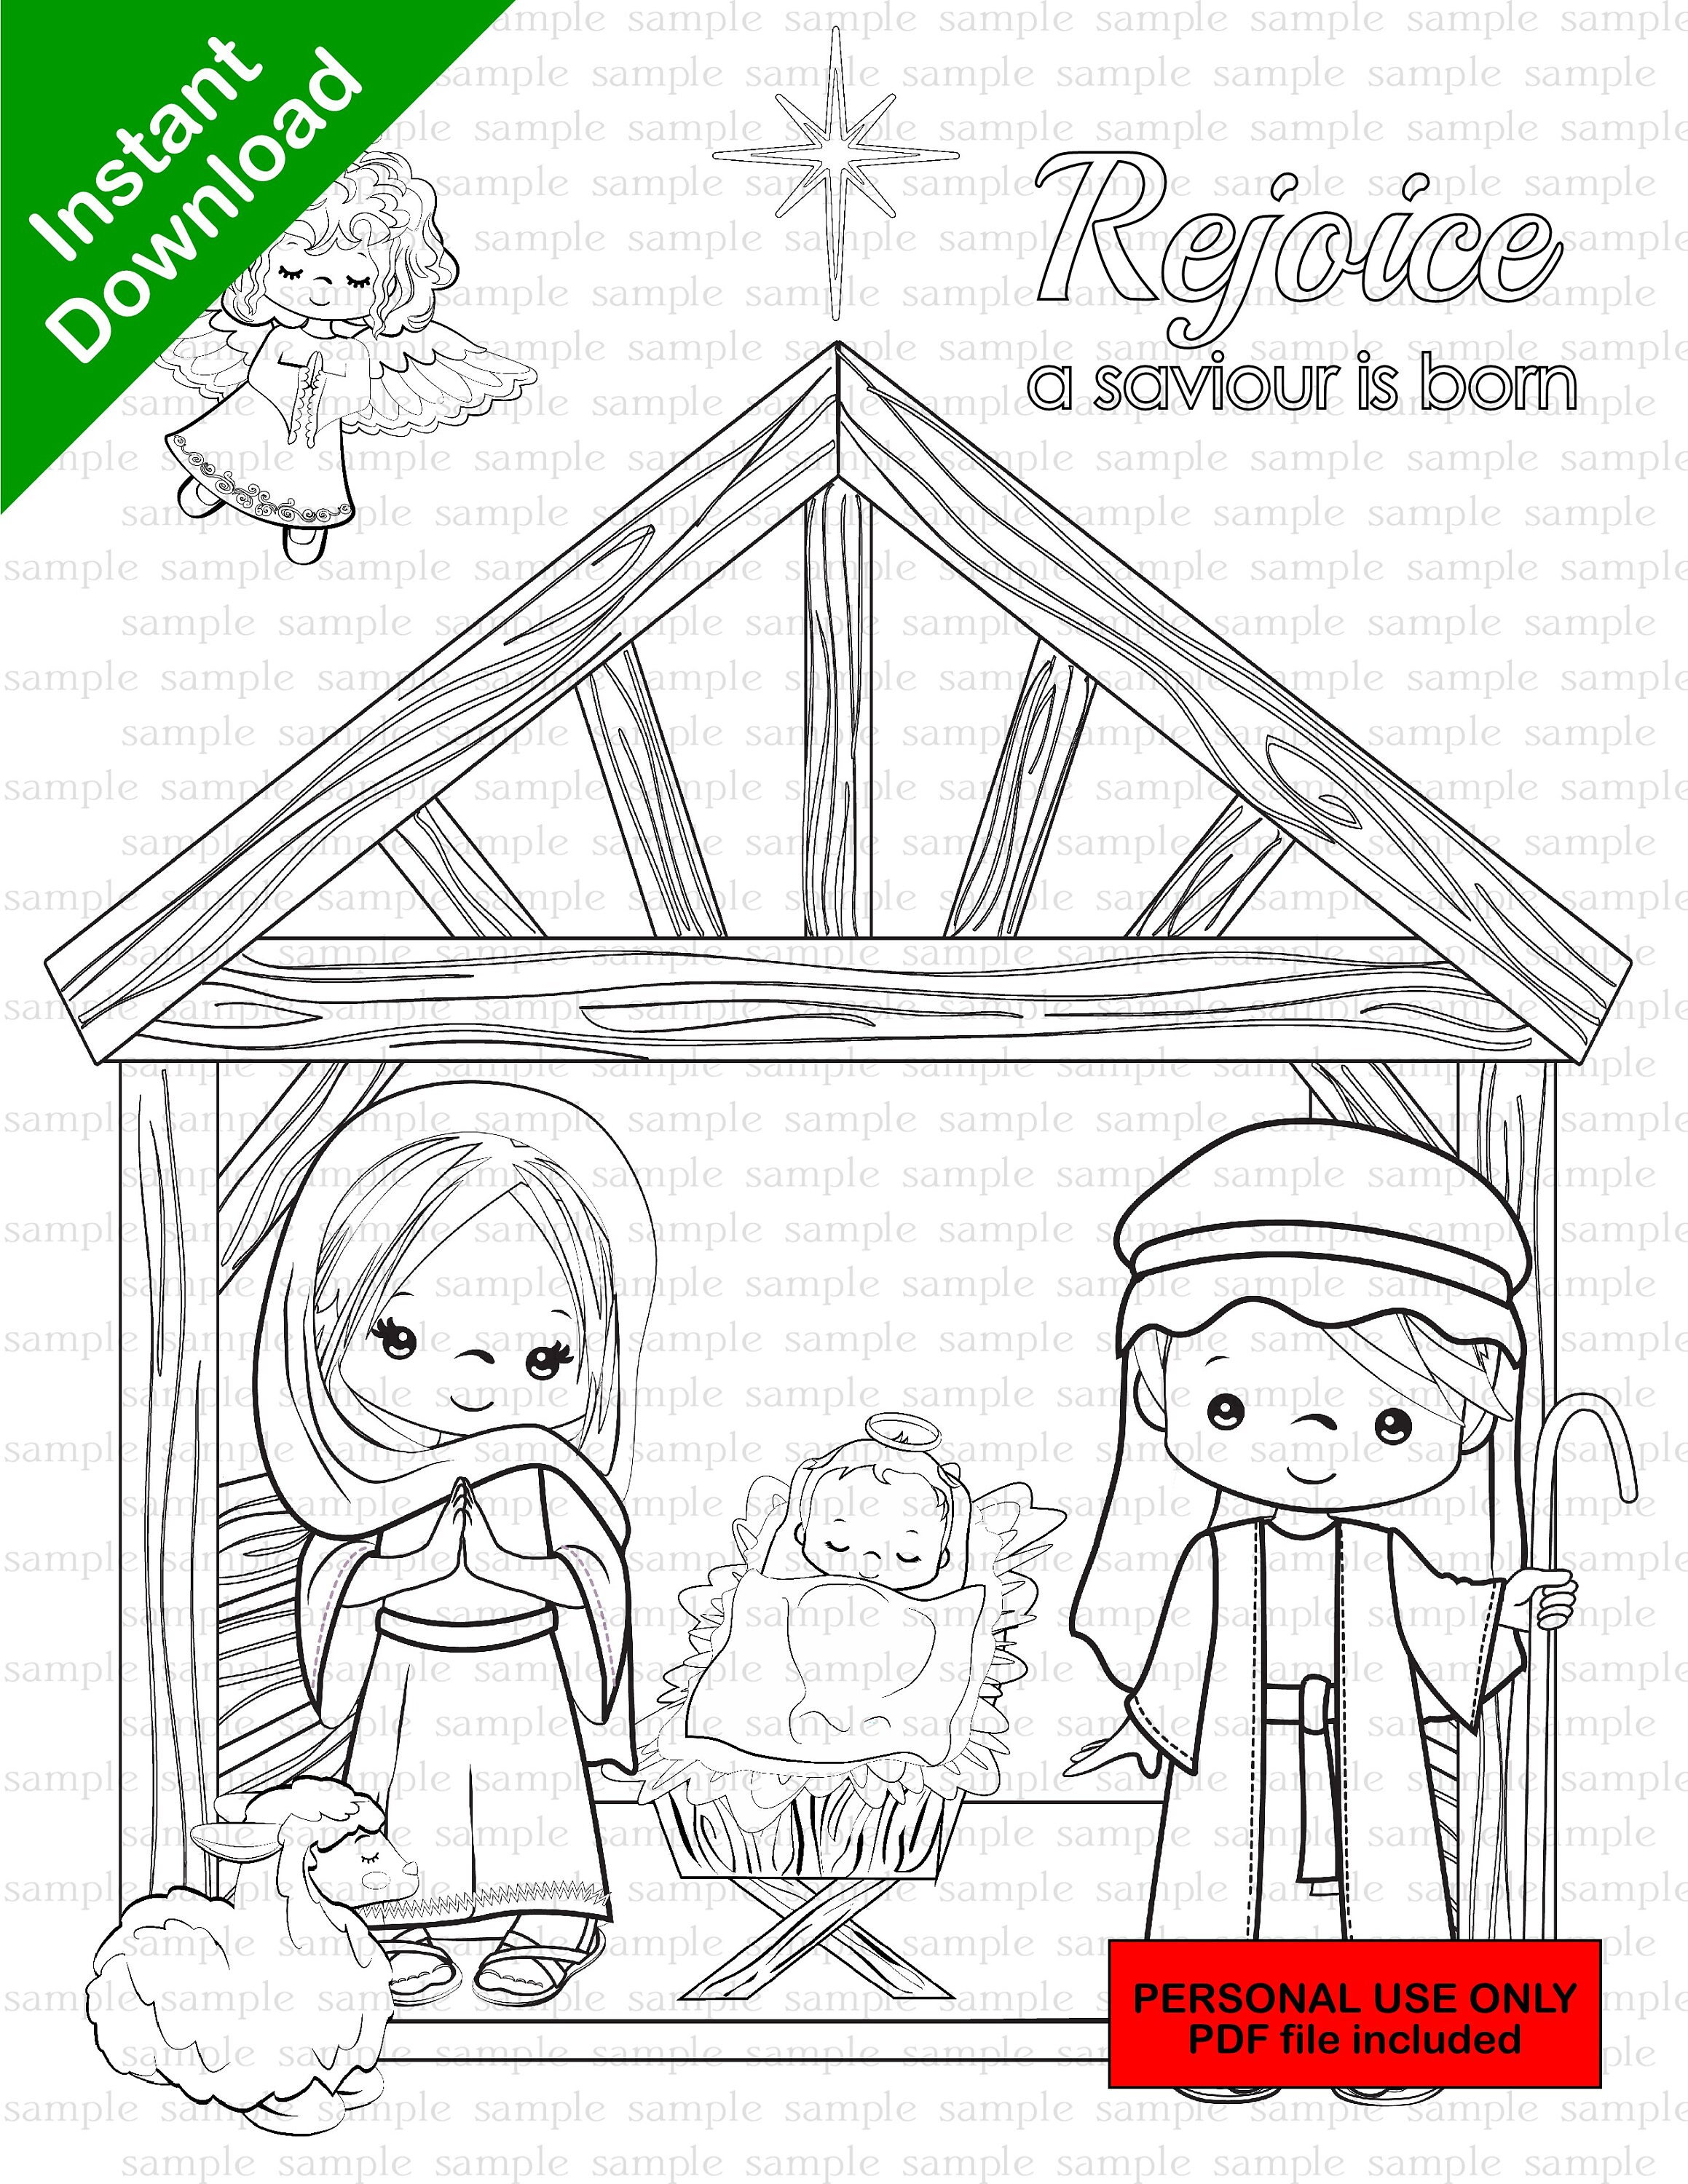 Nativity coloring page jesus birth colouring sheet instant download pdf included download now